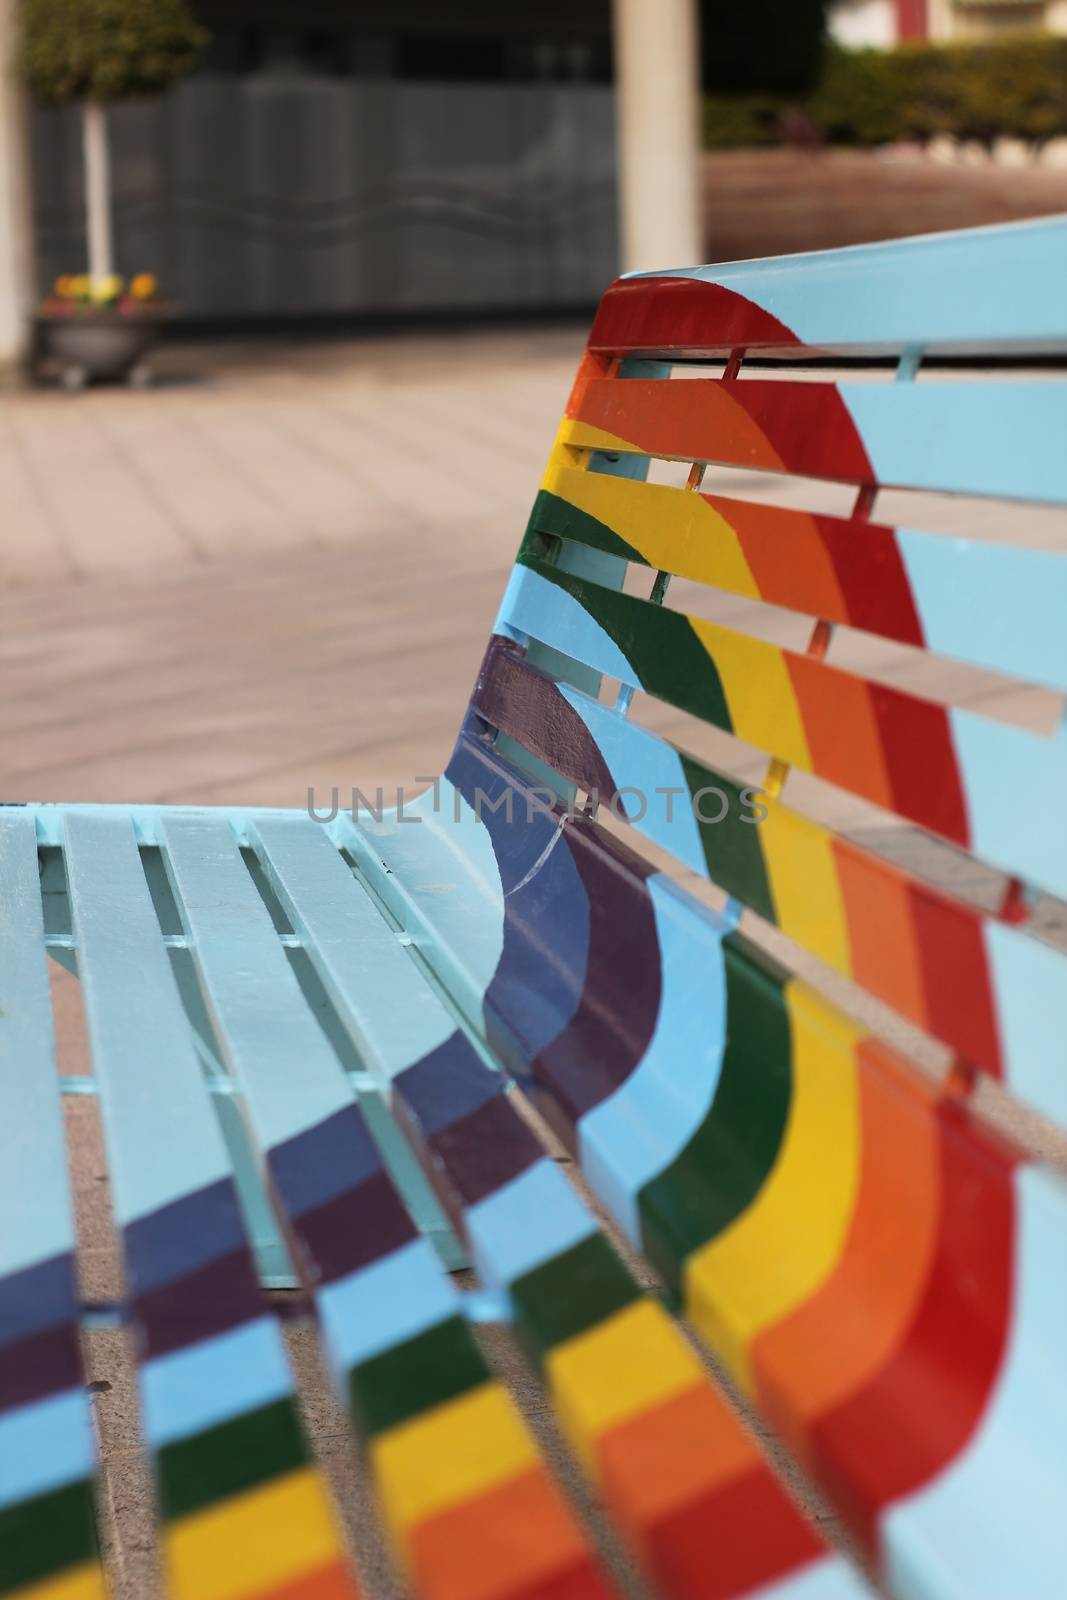 Bench in the city painted with the rainbow flag by soniabonet